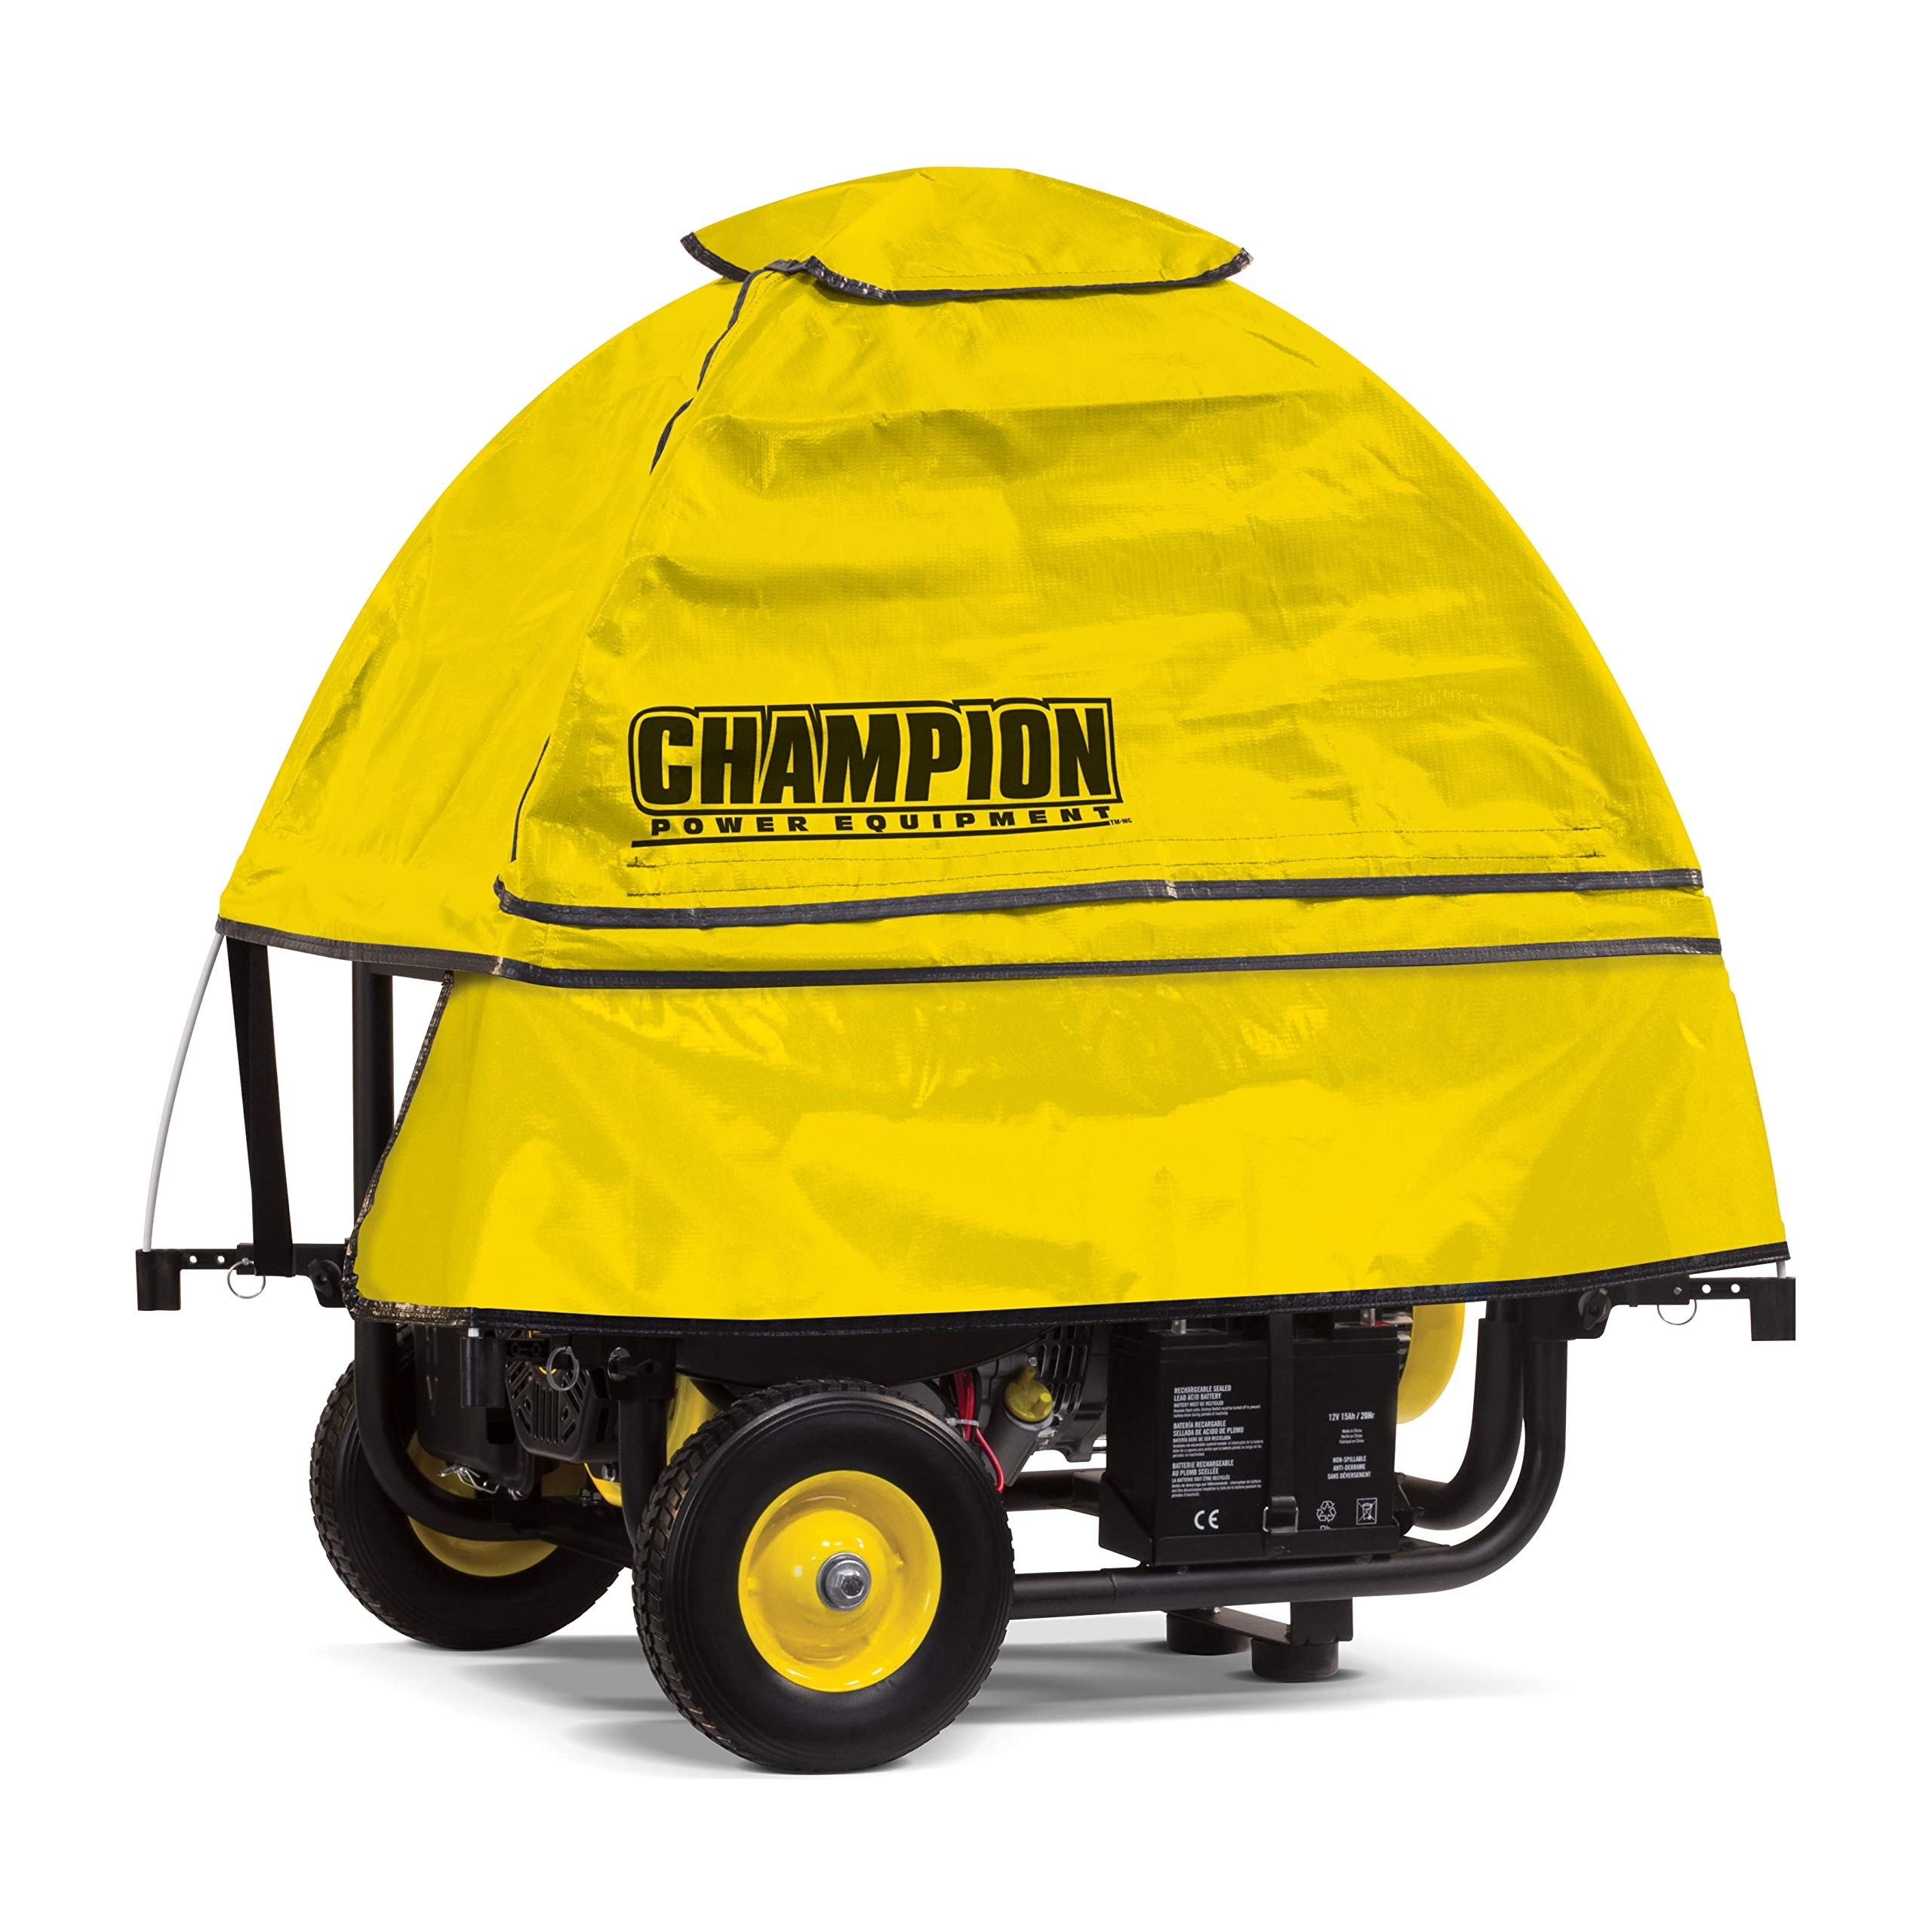 Champion Storm Shield Severe Weather Portable Generator Cover & 48034 25 ft. 30A 125V Generator Power 3750 Watts (L5-30P to Three 5-15R) Extension Cord, Yellow